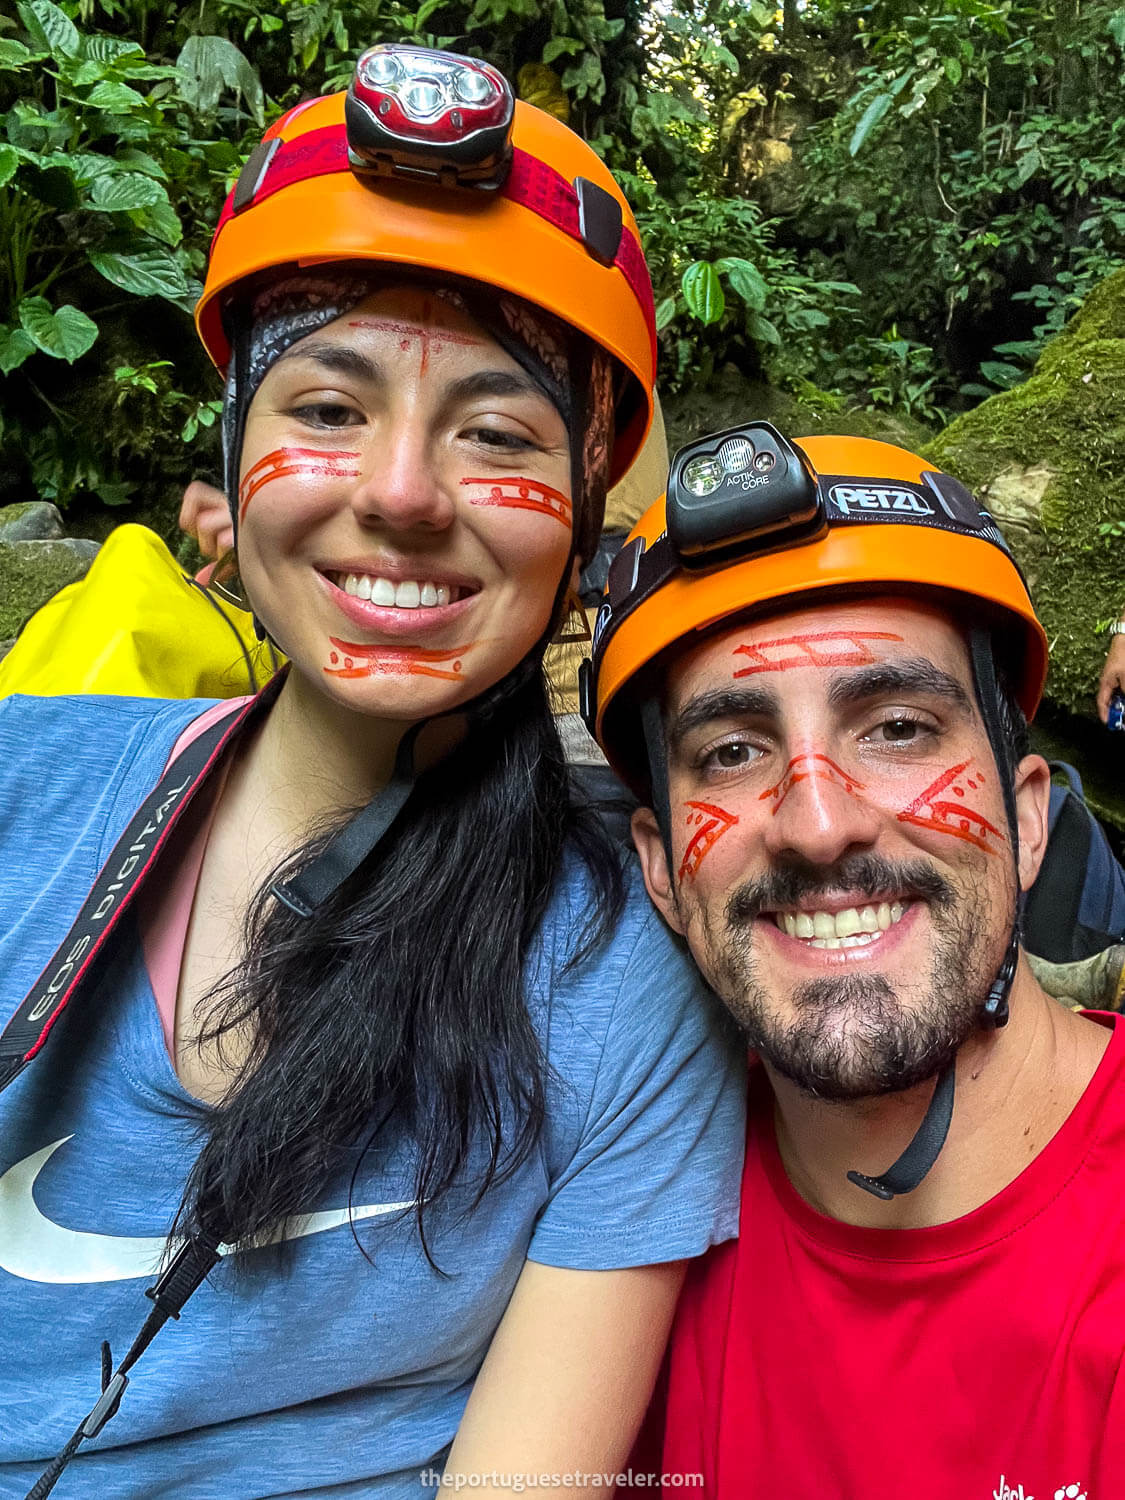 Me and Jhos ready to enter the cave, on the Cueva de Los Tayos expedition.